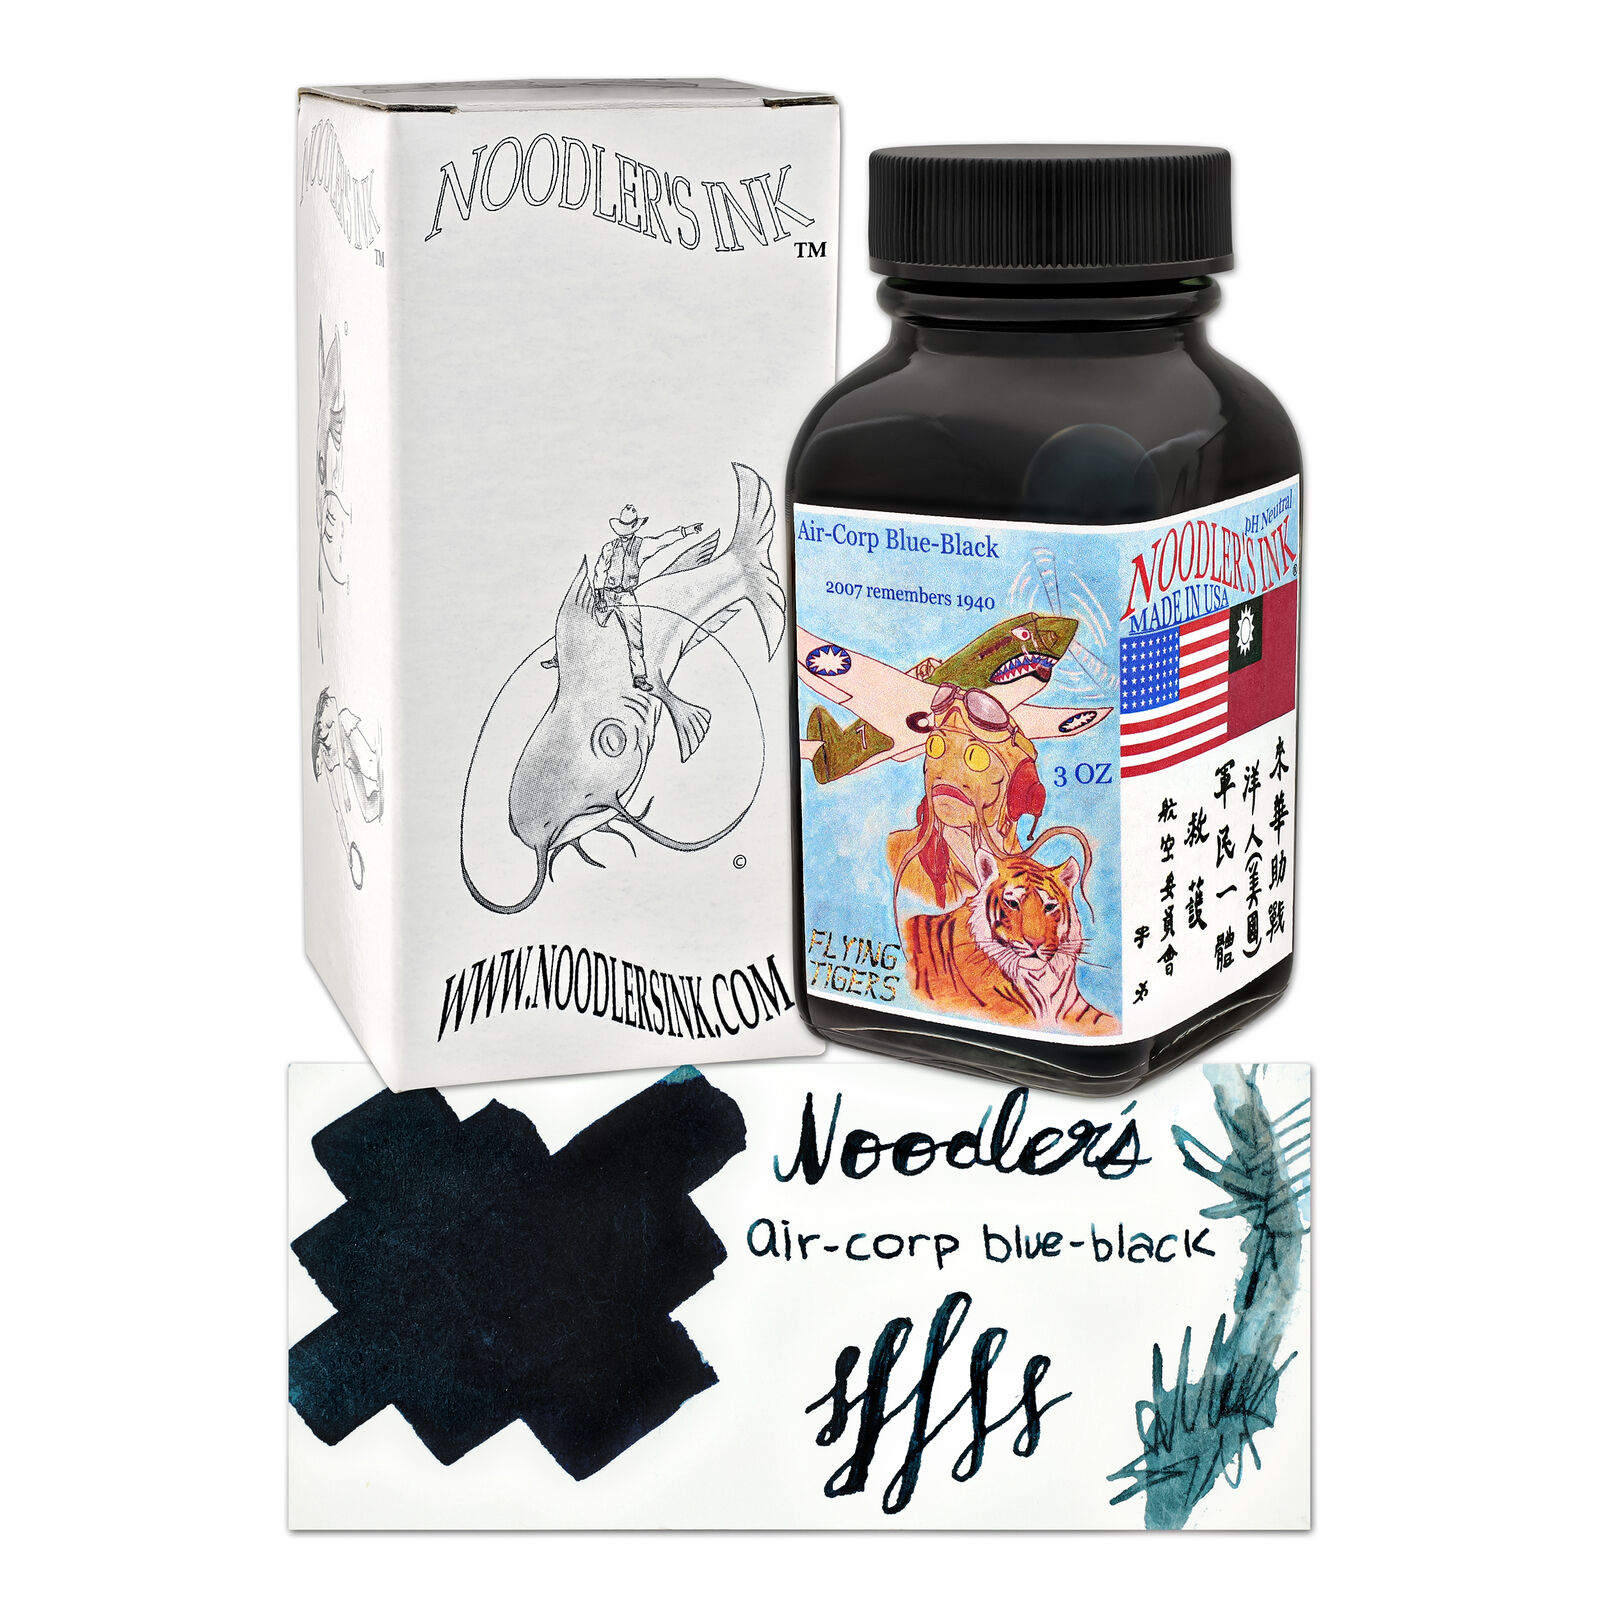 Noodler\'s Bottled Ink for Fountain Pens in Air-Corp Blue-Black - 3oz -NEW in Box